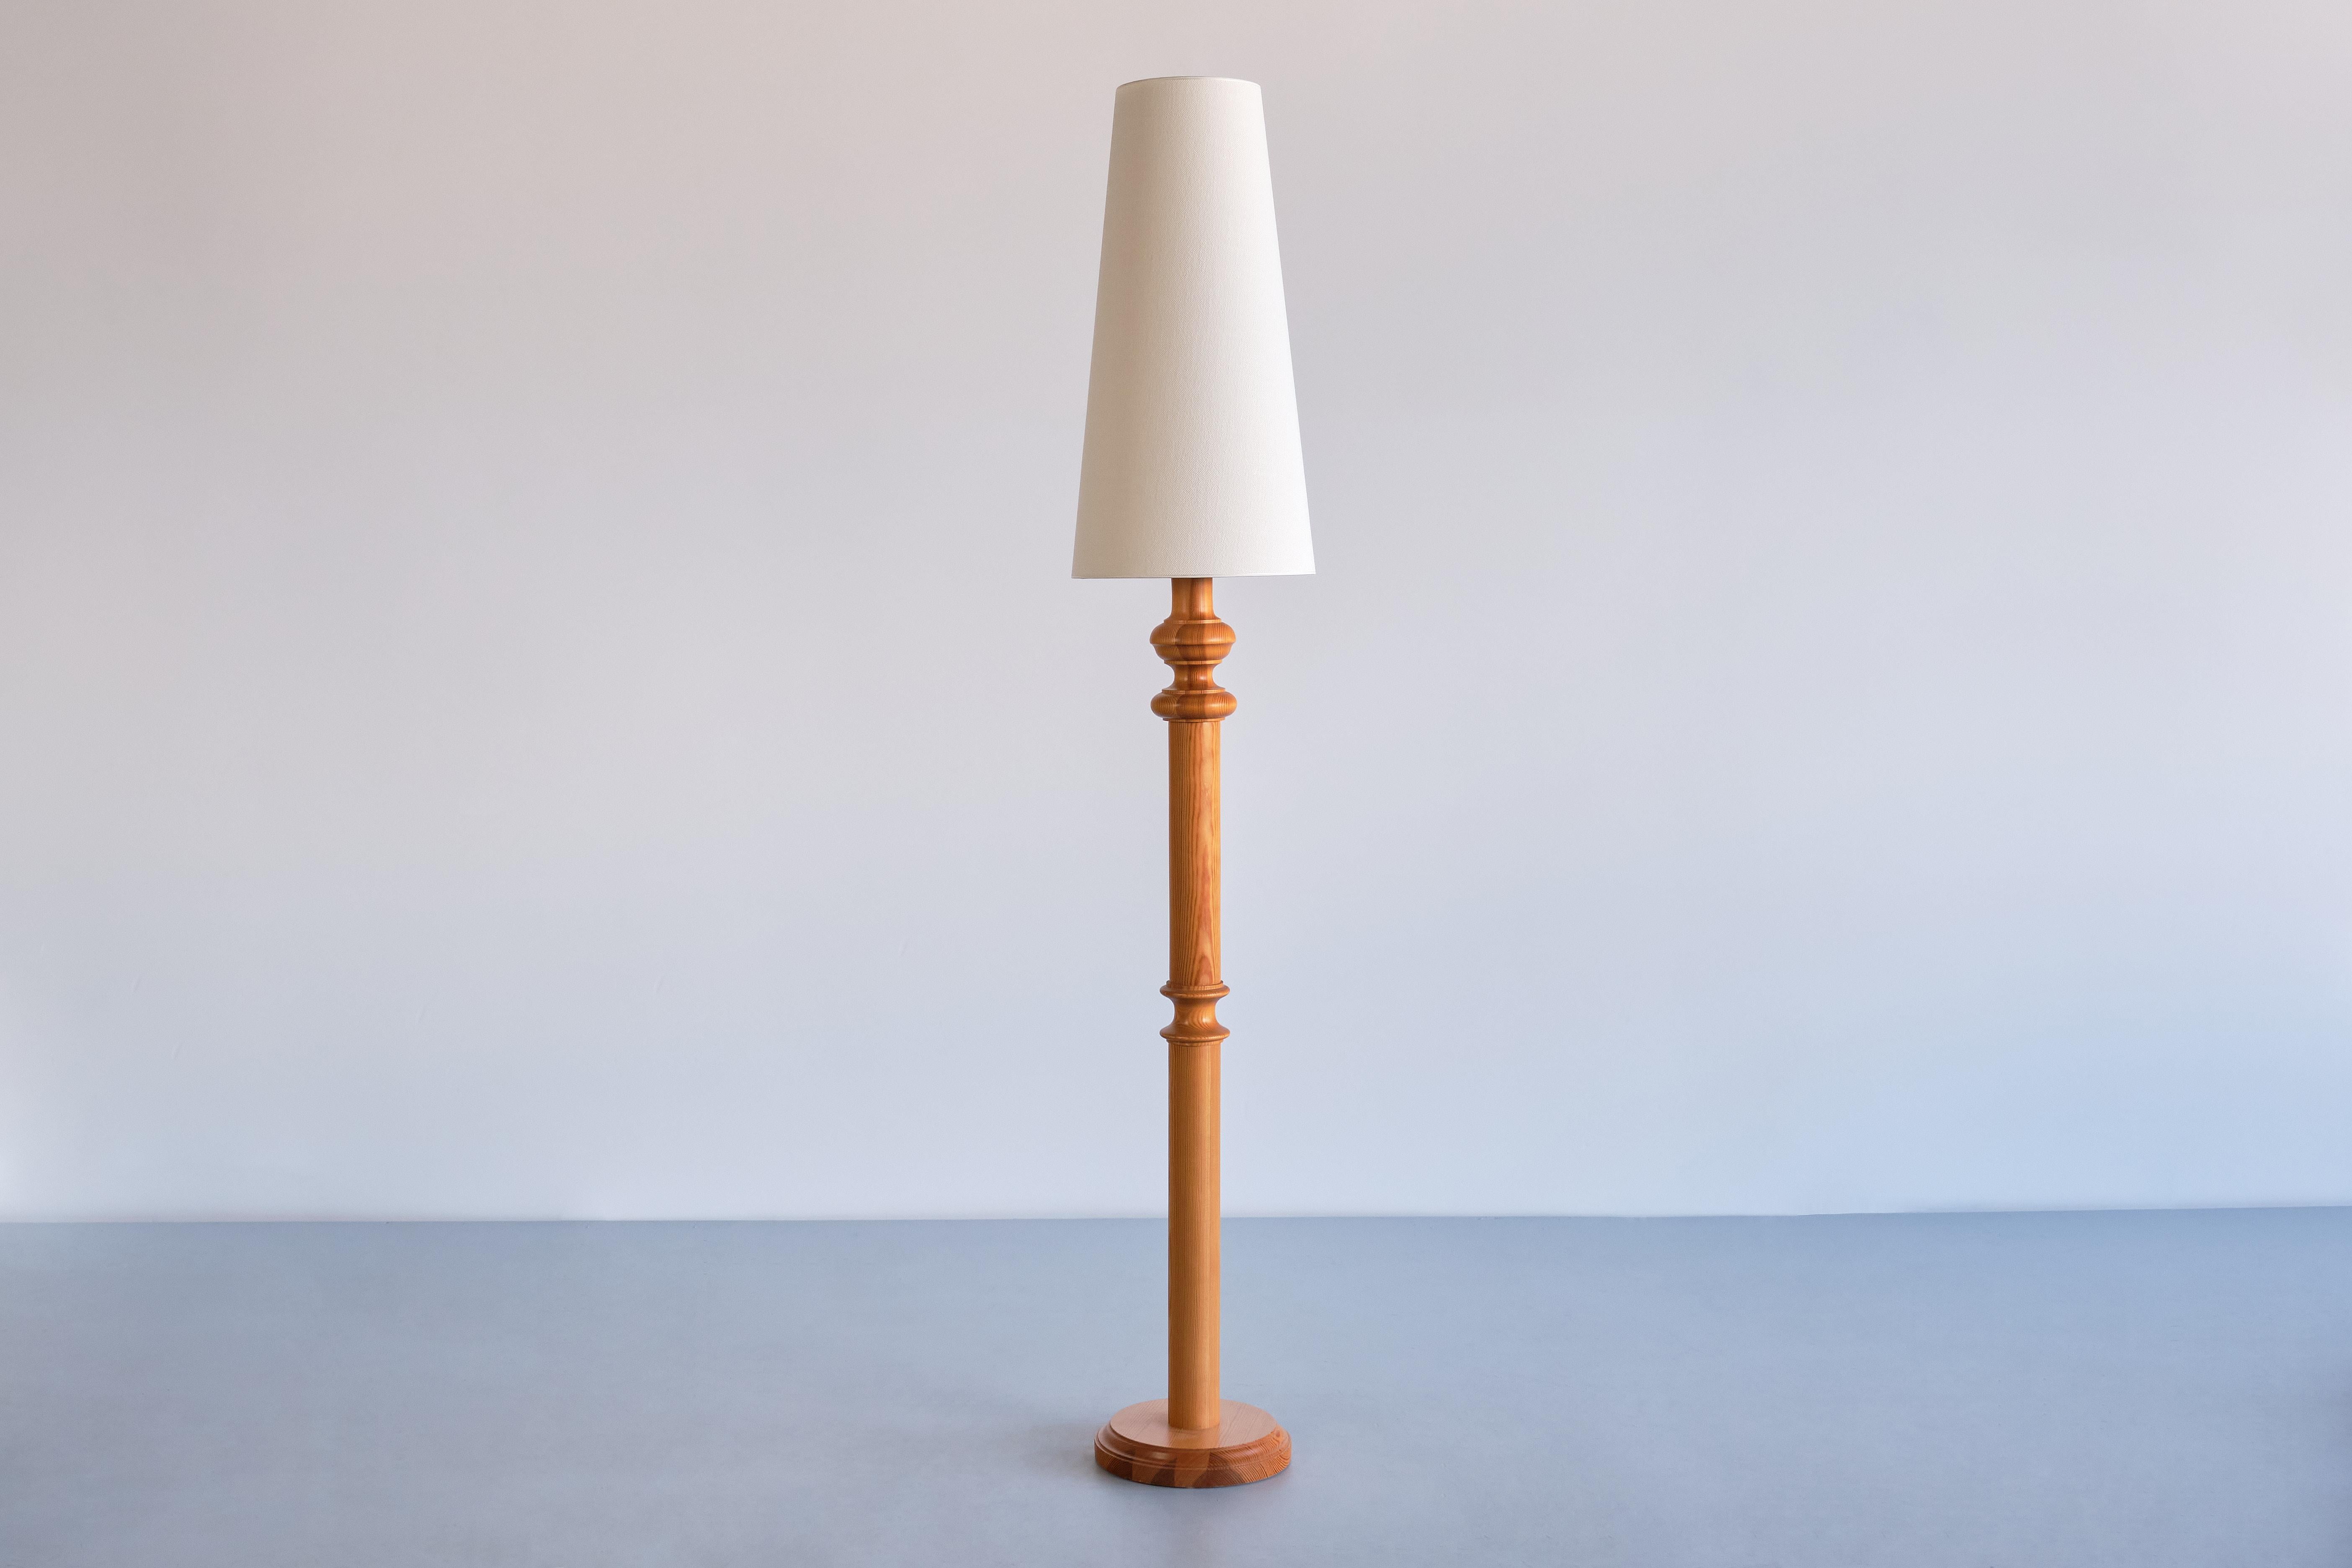 This rare floor lamp was produced by the Swedish lighting manufacturer NAFA Nybro Armaturfabrik in the late 1960s.
The striking, tall base is executed in solid Swedish pine wood, displaying the lively, attractive grain pine wood is known for. The